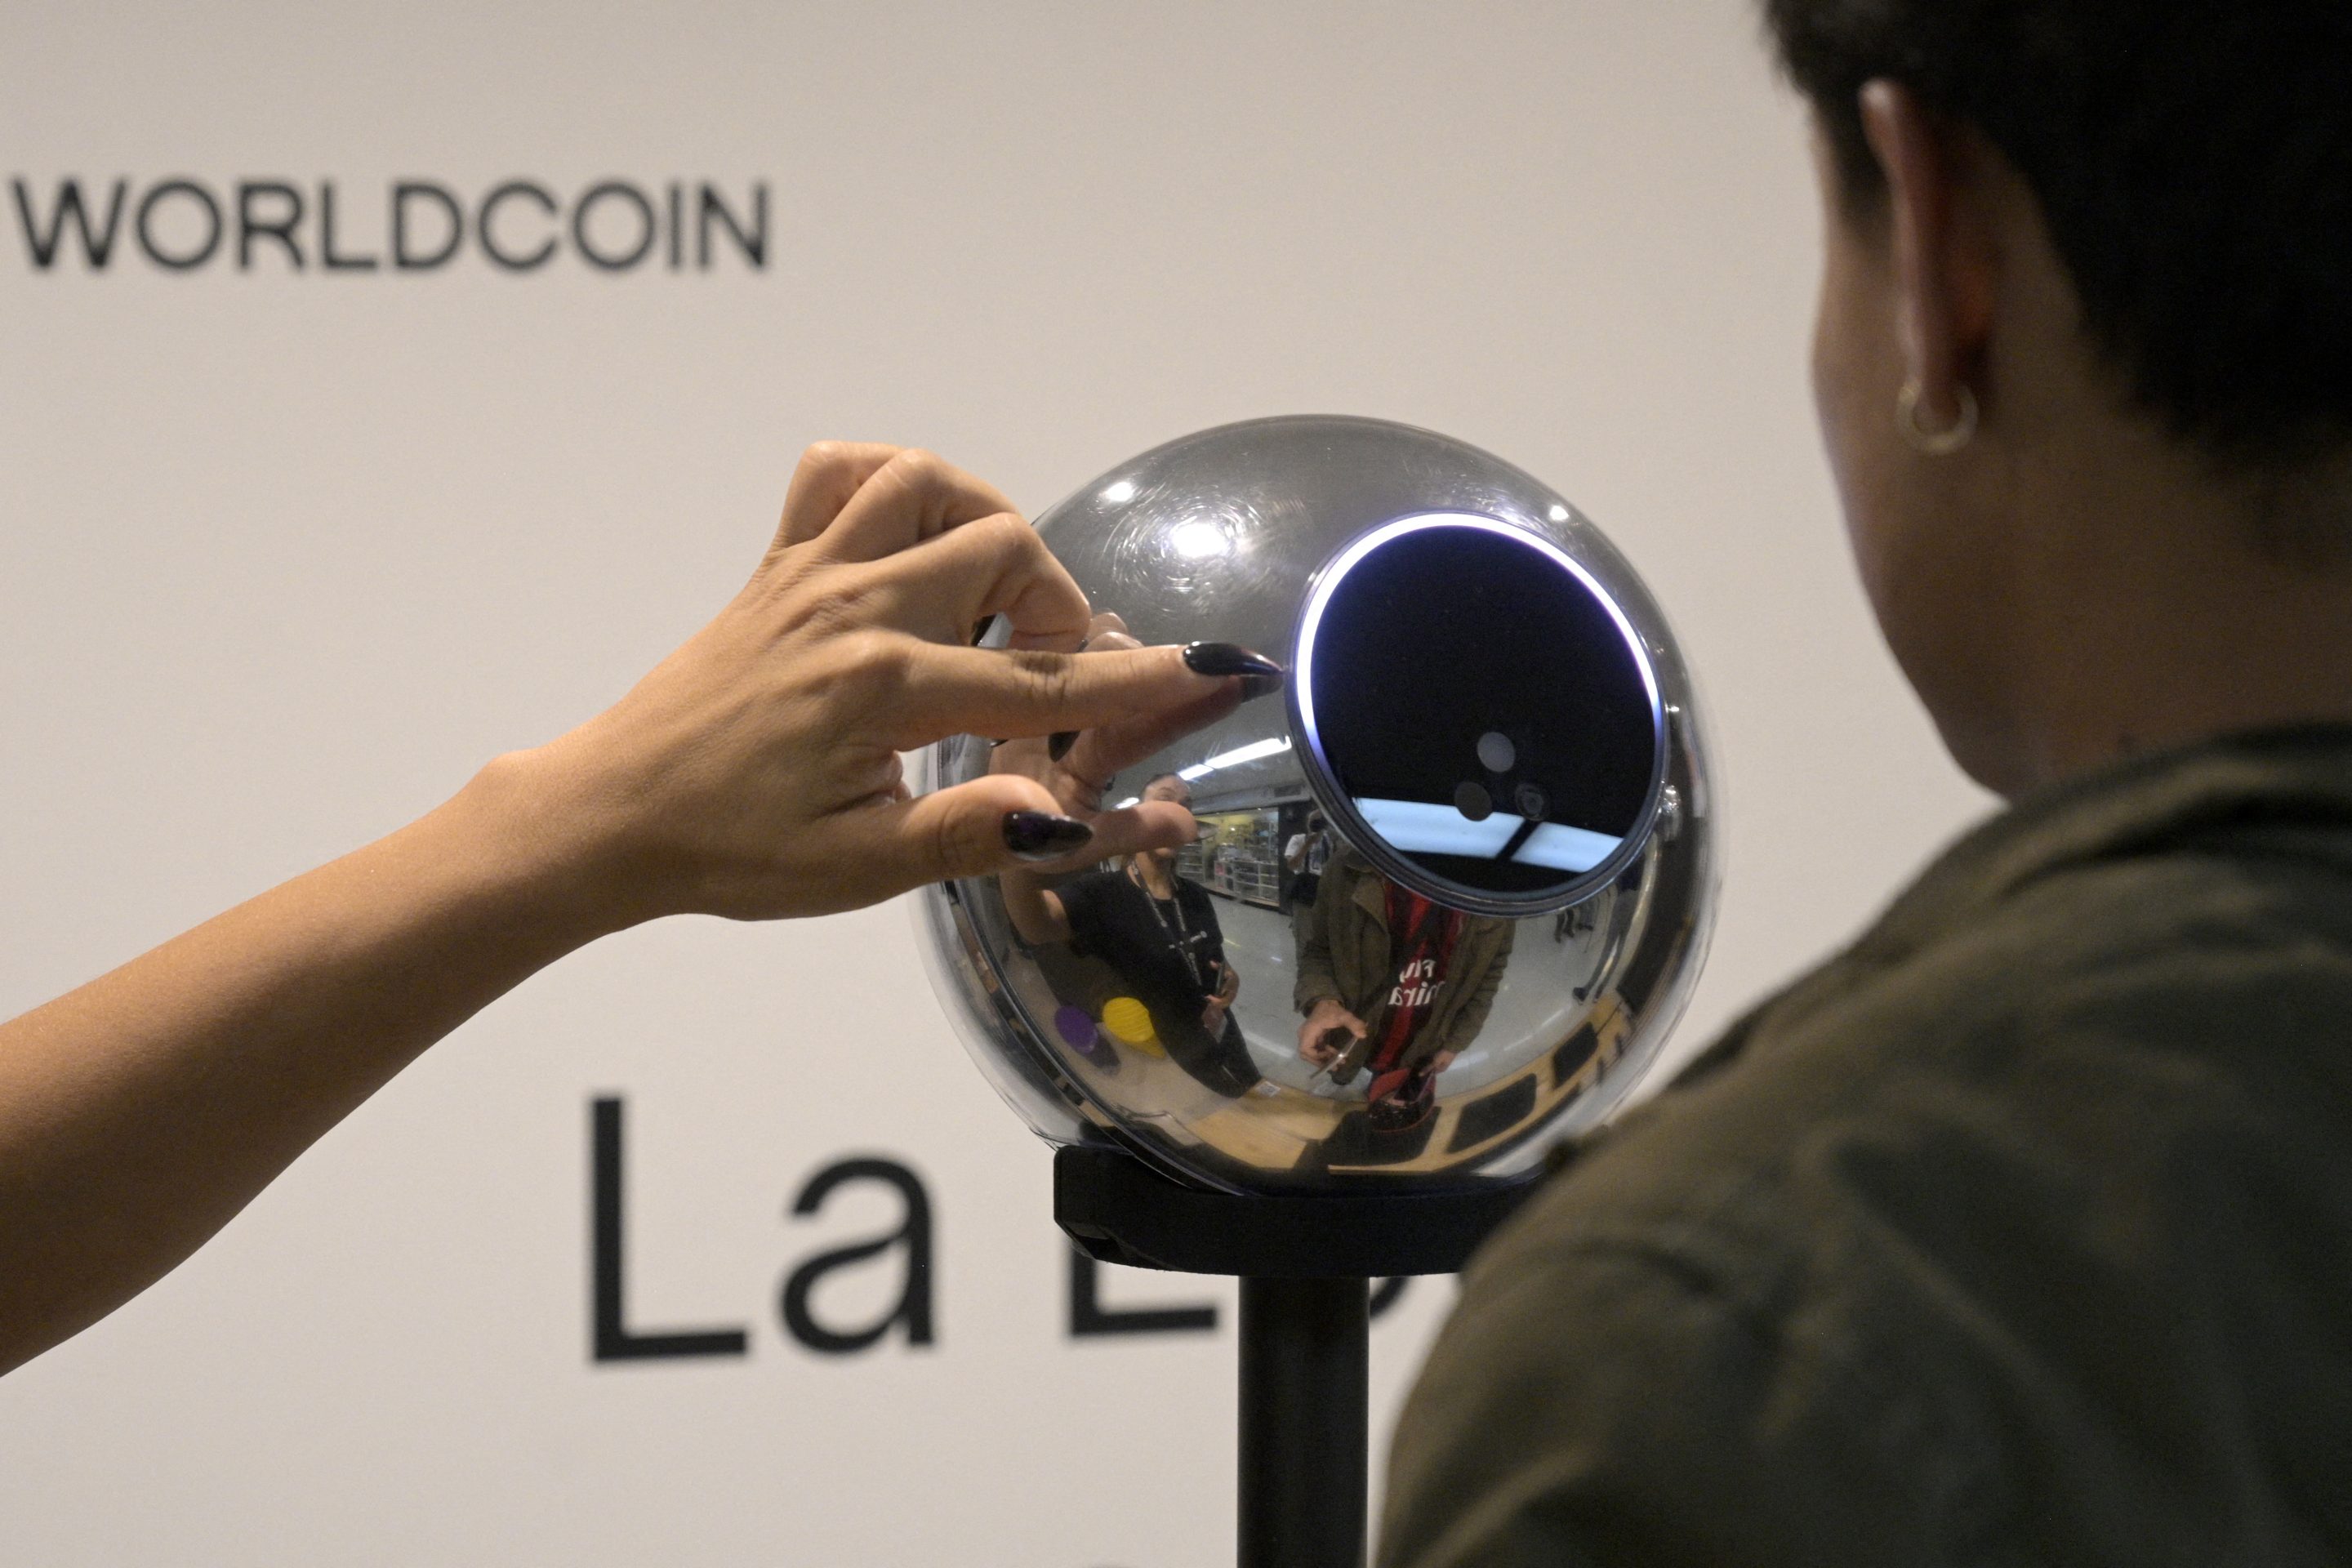 A man has his iris scanned with an orb, a biometric data scanning device, in exchange for the Worldcoin cryptocurrency in Buenos Aires on March 22, 2024. In recent months, hundreds of thousands of Argentines have stood in front of a Worldcoin orb to scan the iris of their eyes in inflation-hit Argentina, where recent tightening delivered the coup de grace. The Worldcoin cryptocurrency, with a verification system based on iris recognition and launched in July 2023 by OpenAI CEO Sam Altman, is being closely watched by regulators in several countries due to data protection concerns. (Photo by JUAN MABROMATA / AFP) (Photo by JUAN MABROMATA/AFP via Getty Images)